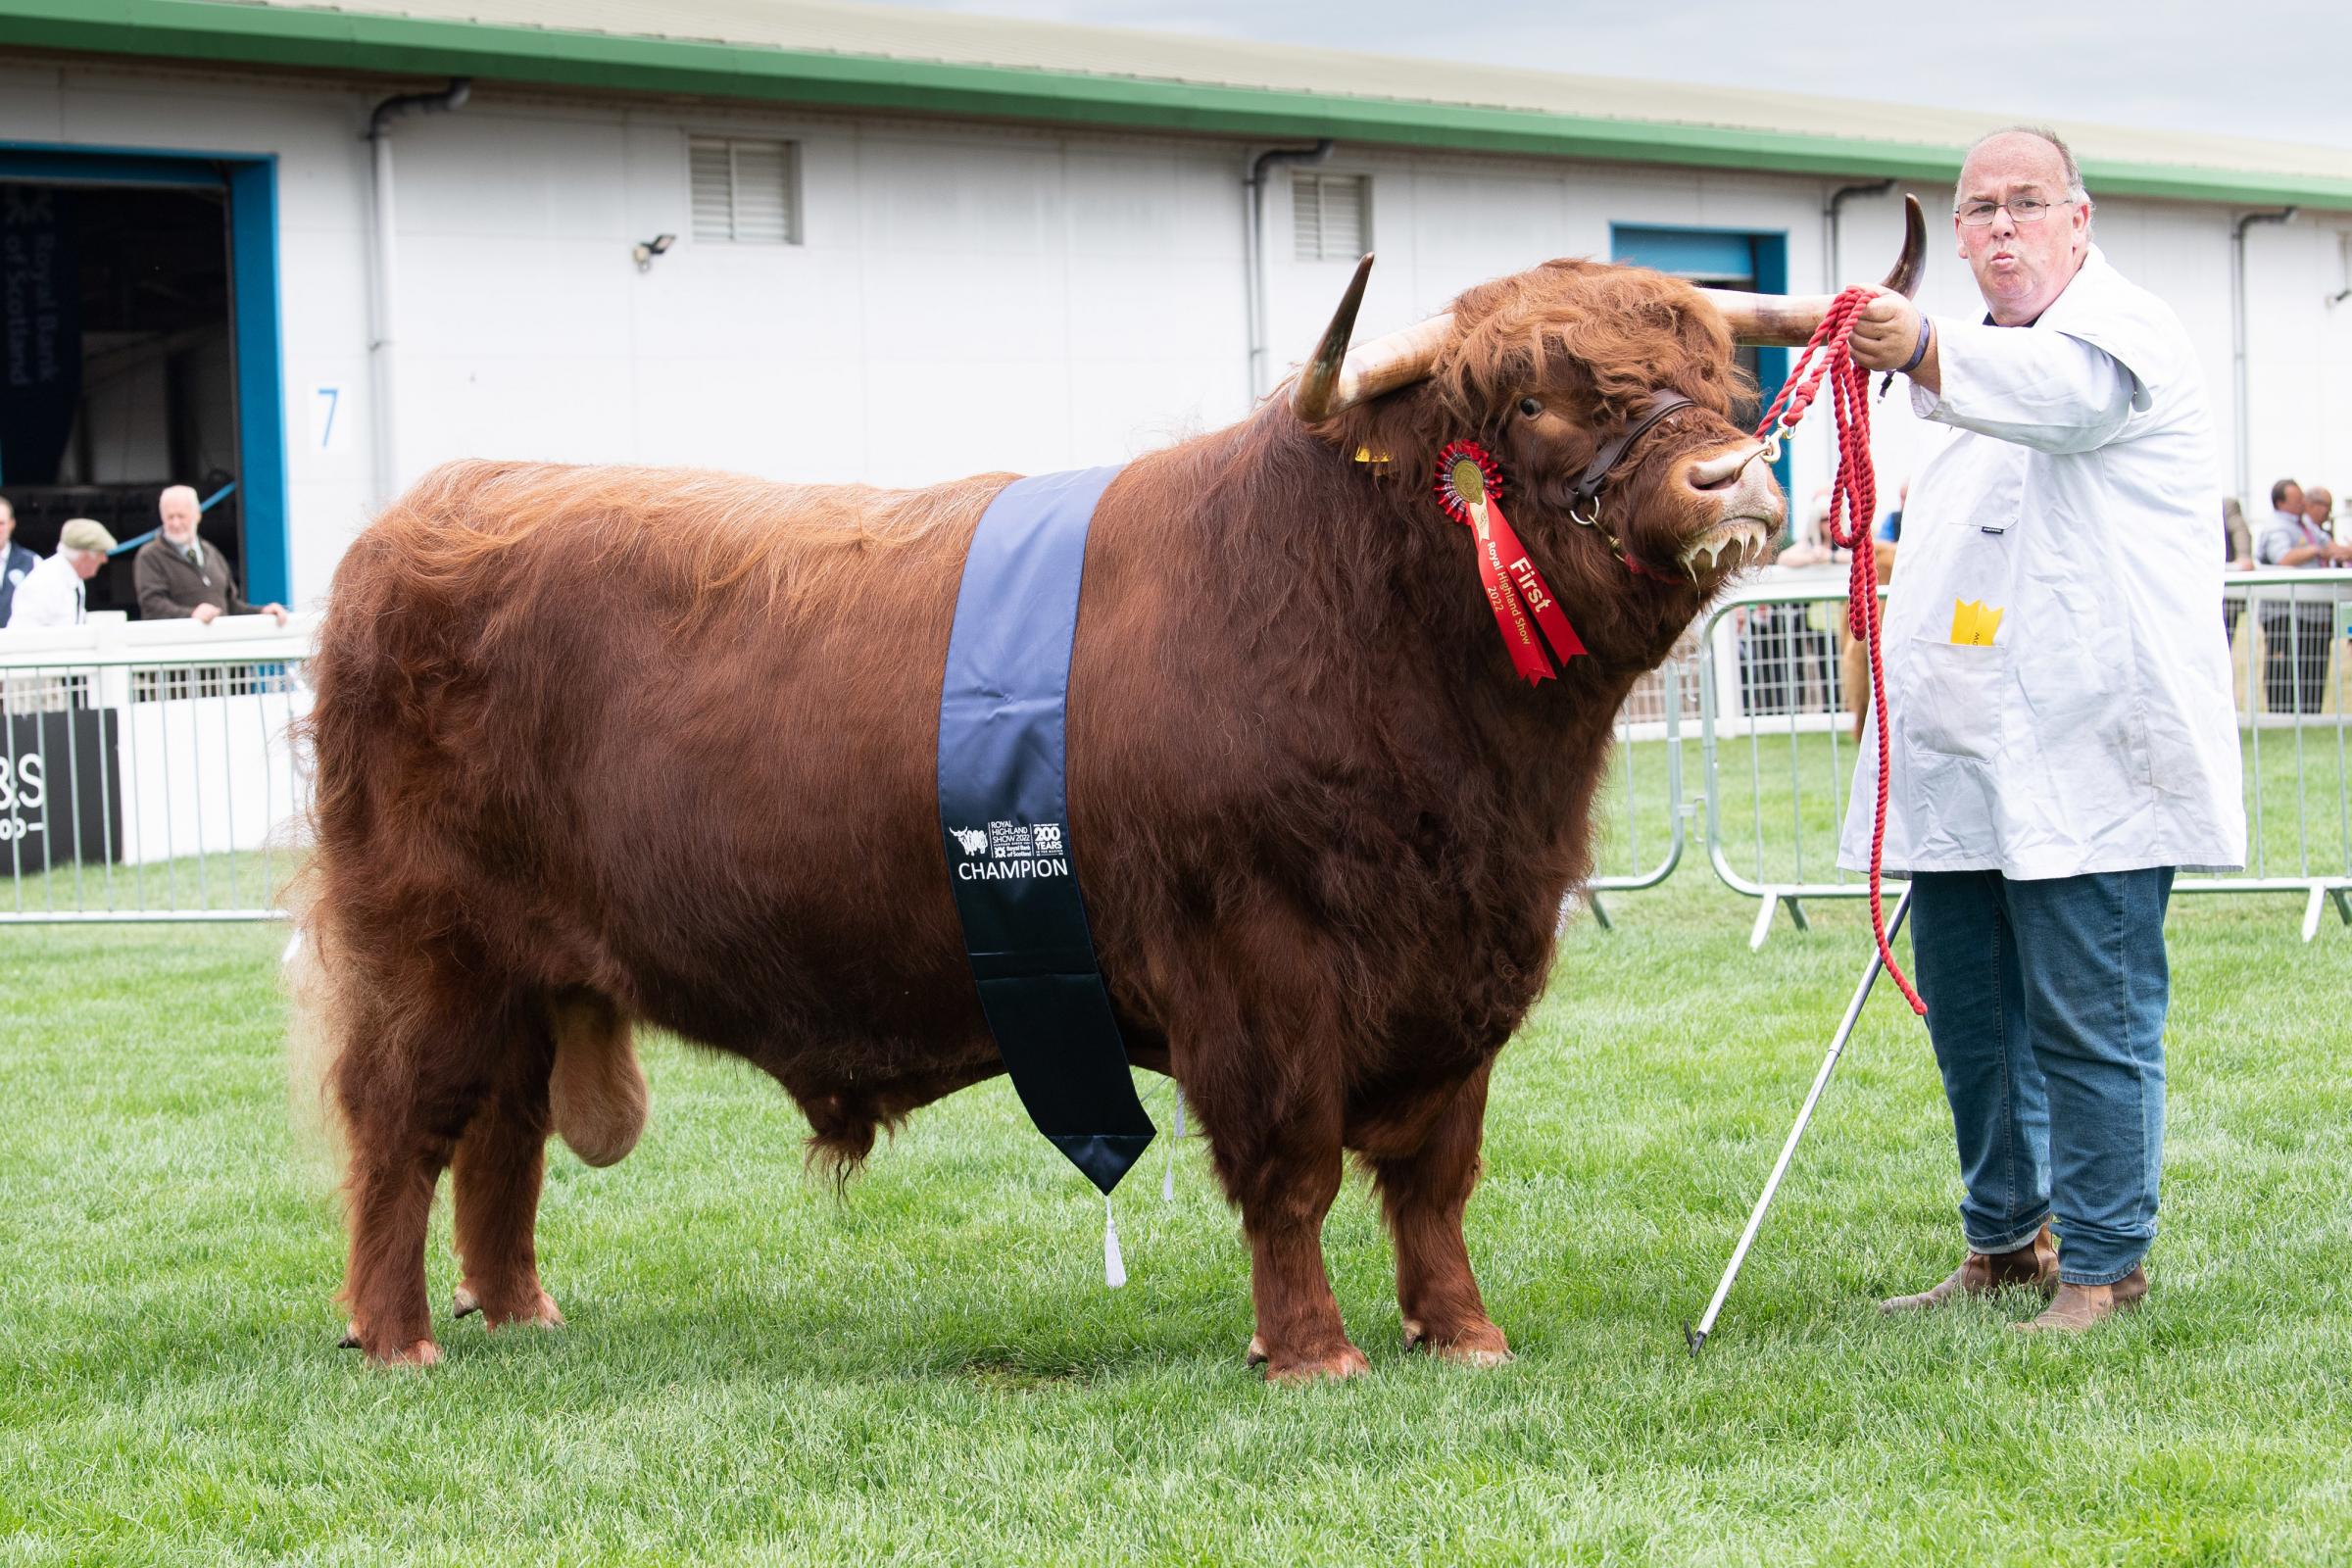 Queens' local bull, Gurgurlach of Balmoral, was crowned champion at the 2022 Royal Highland Show.